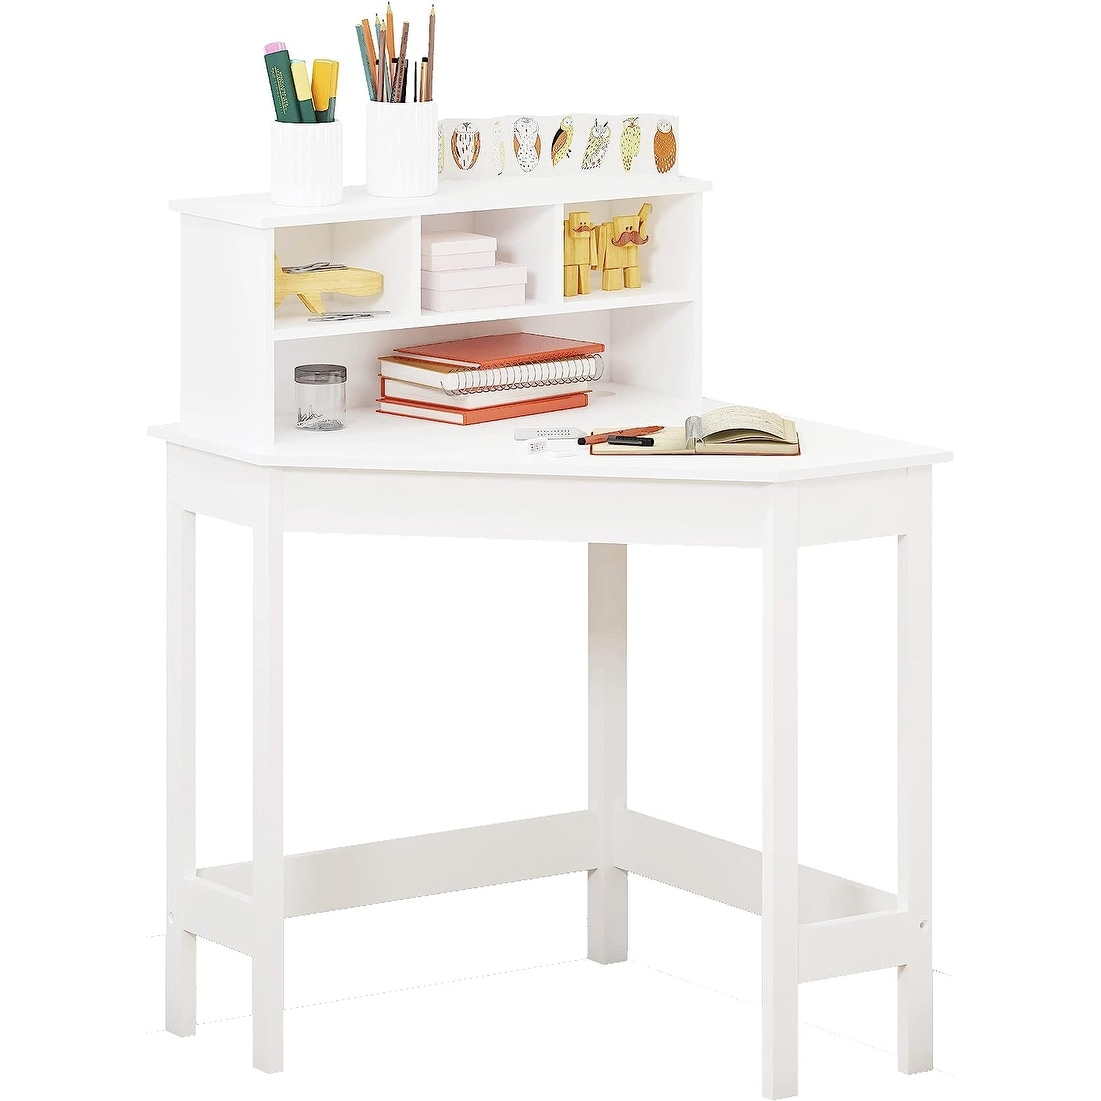 UTEX Corner Desk with Storage and Hutch for Small Space, Study Computer Desk Workstation & Writing Table, White